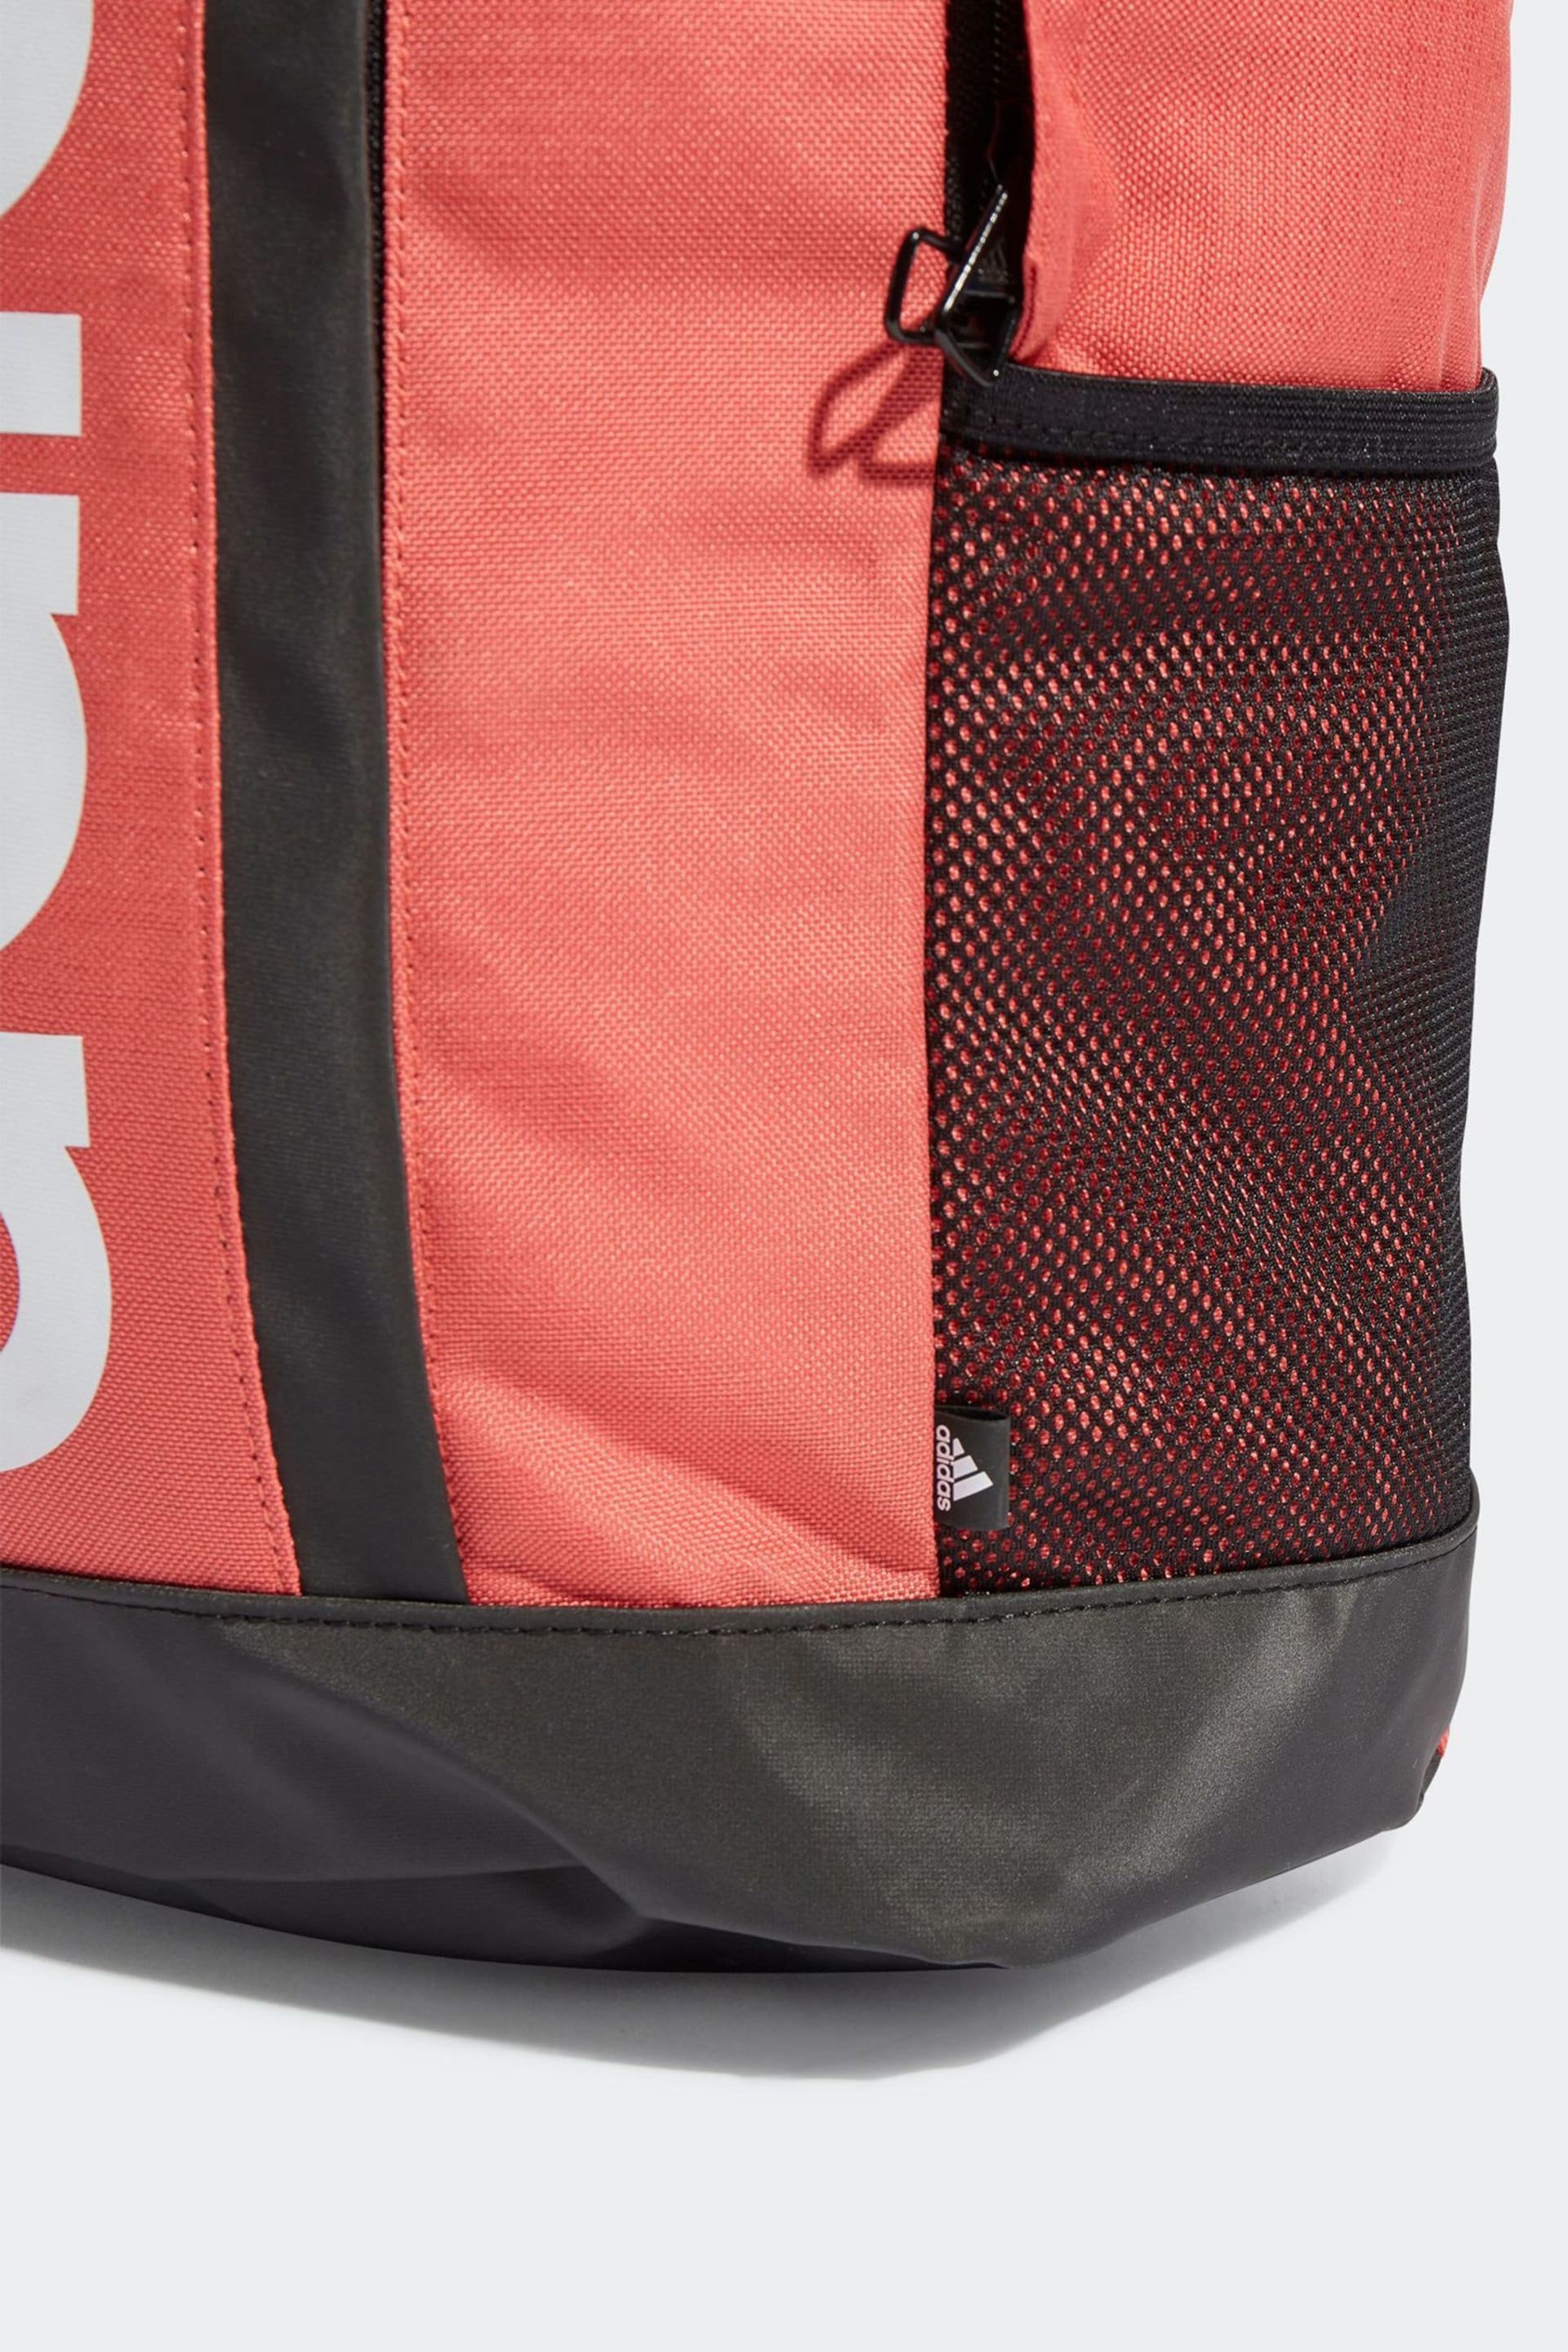 adidas Red Essentials Linear Backpack - Image 4 of 5